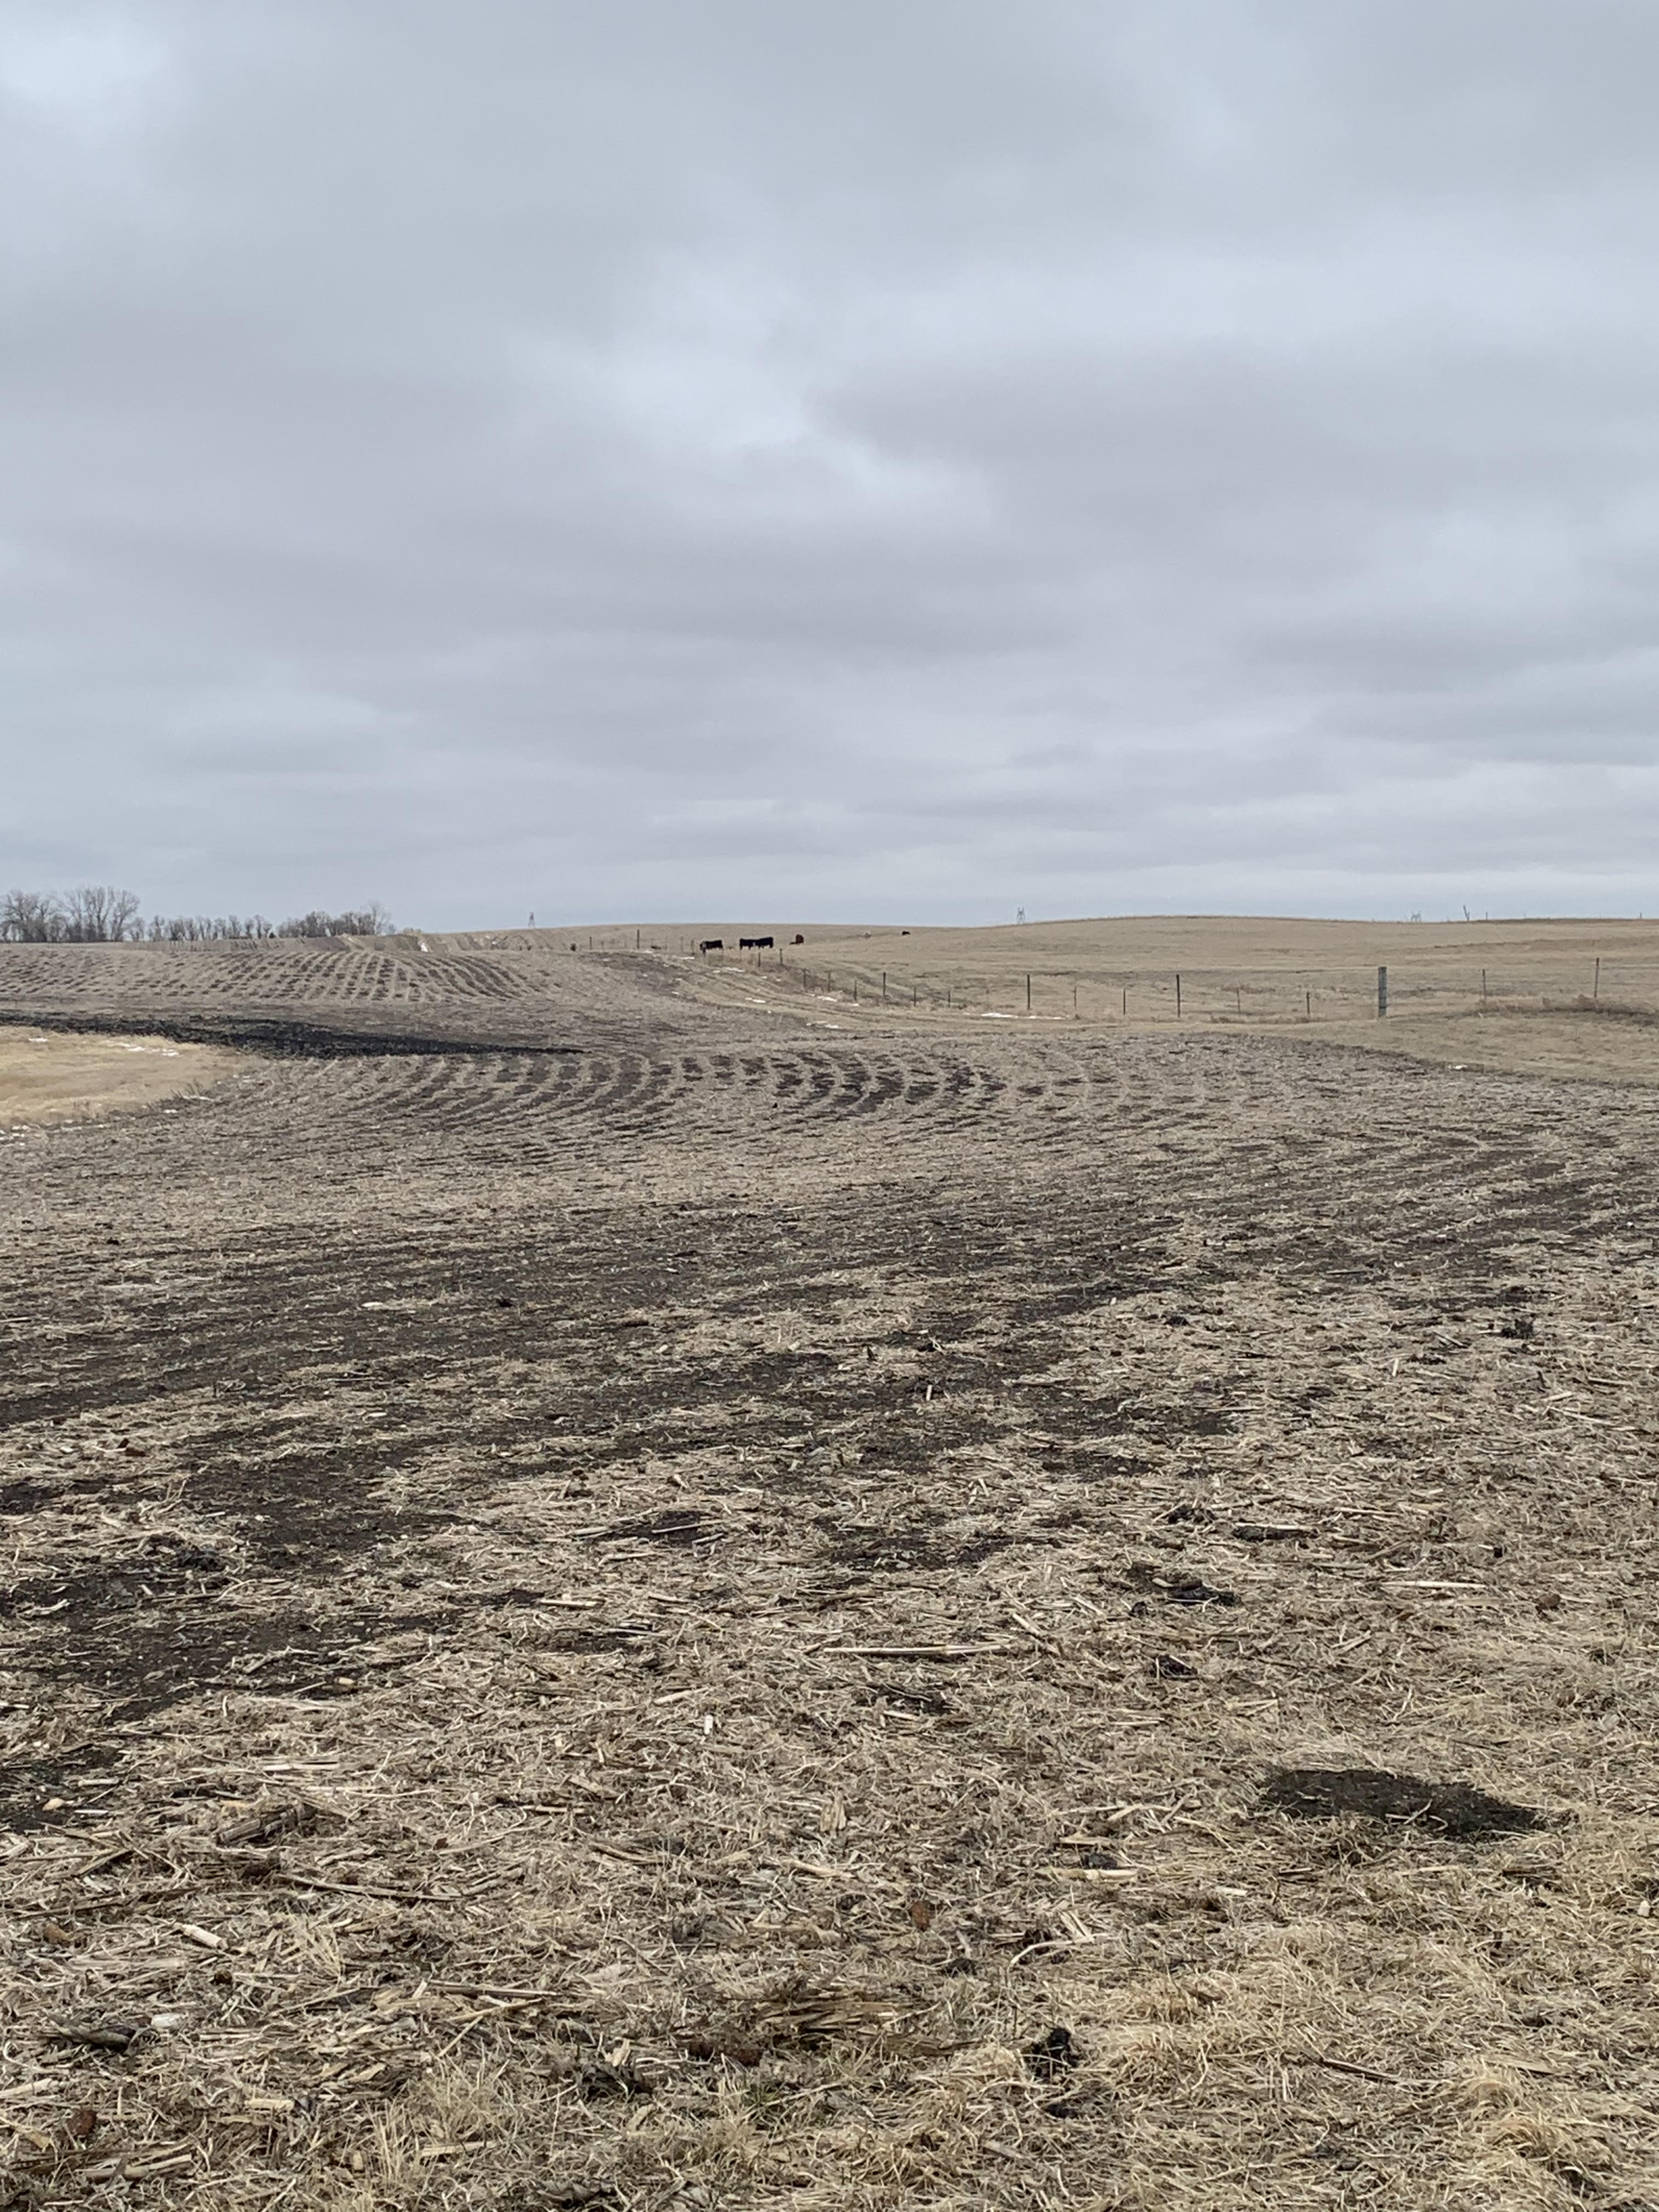 Morning Ag News, April 16, 2021: Not much rain expected in the near future